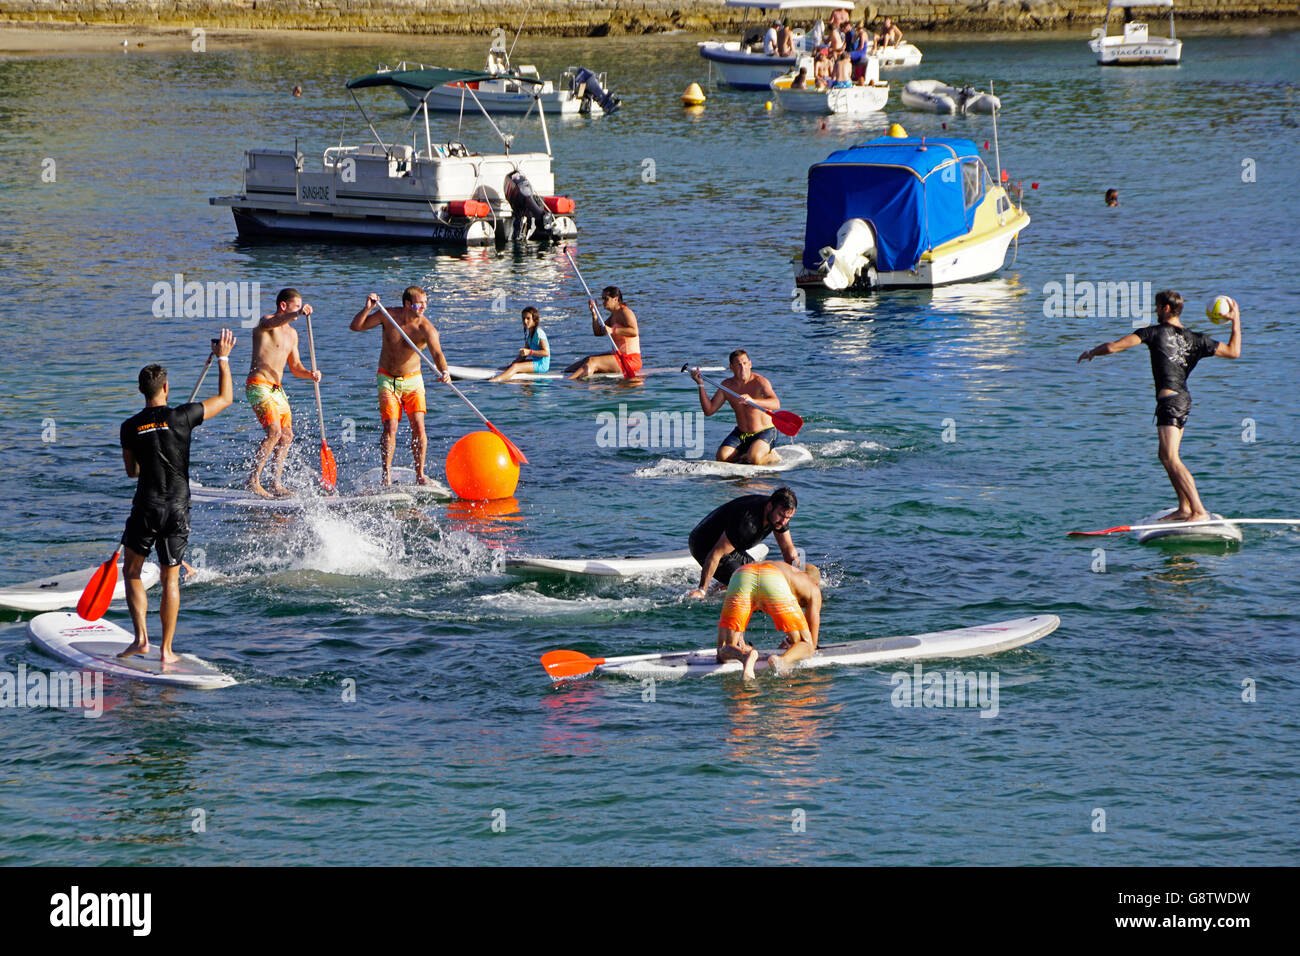 Stand up paddle (SUP) polo game at Manly Wharf, NSW, Australia. Stock Photo